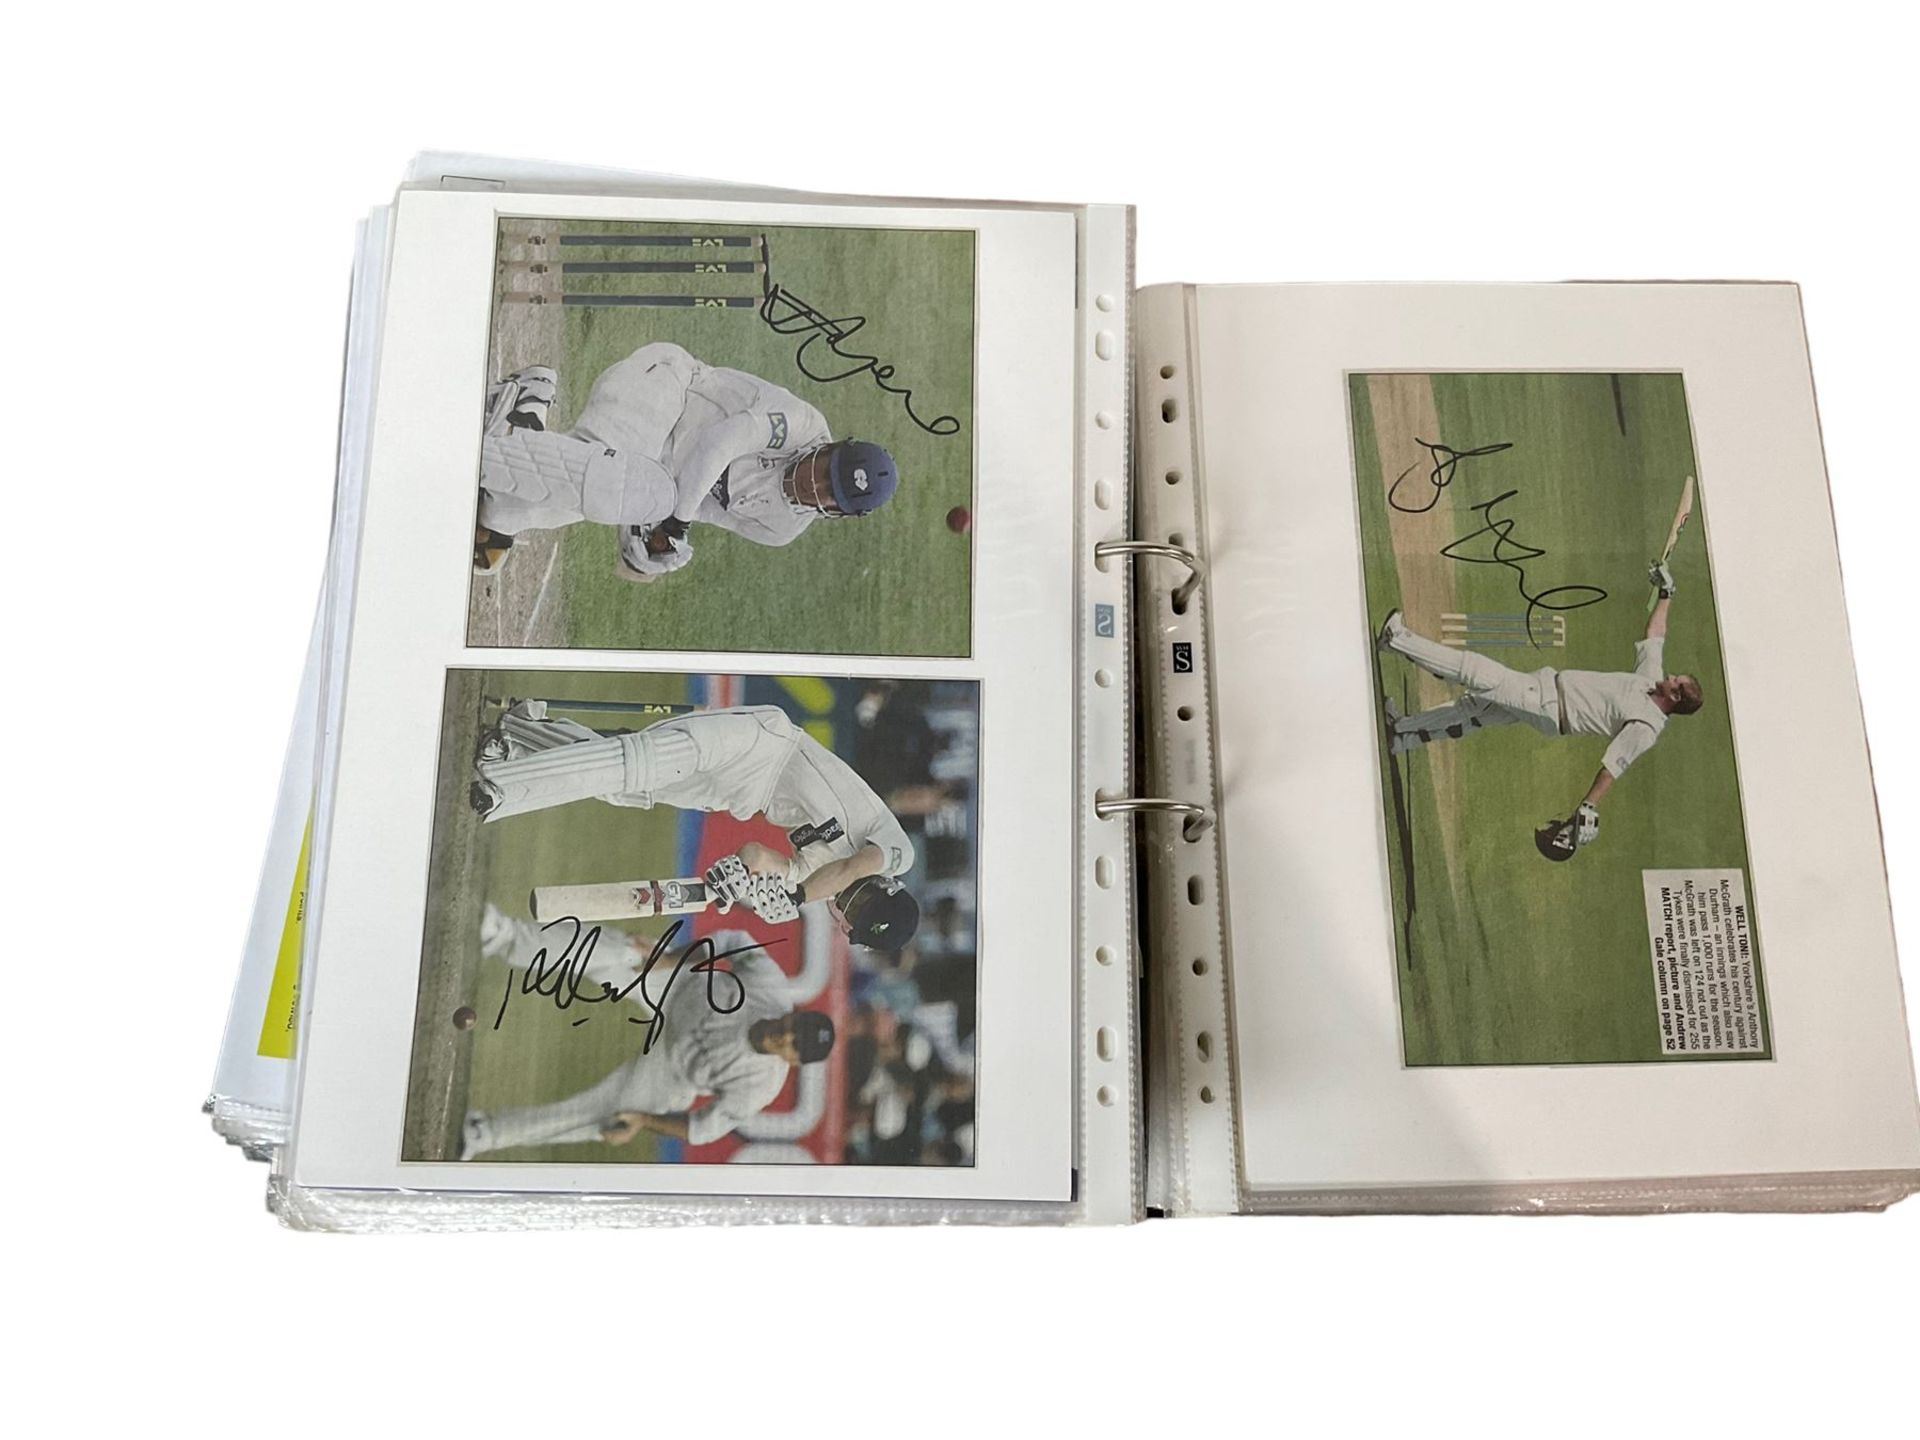 Yorkshire Cricket - various autographs and signatures including Jason Gillespie - Image 11 of 12